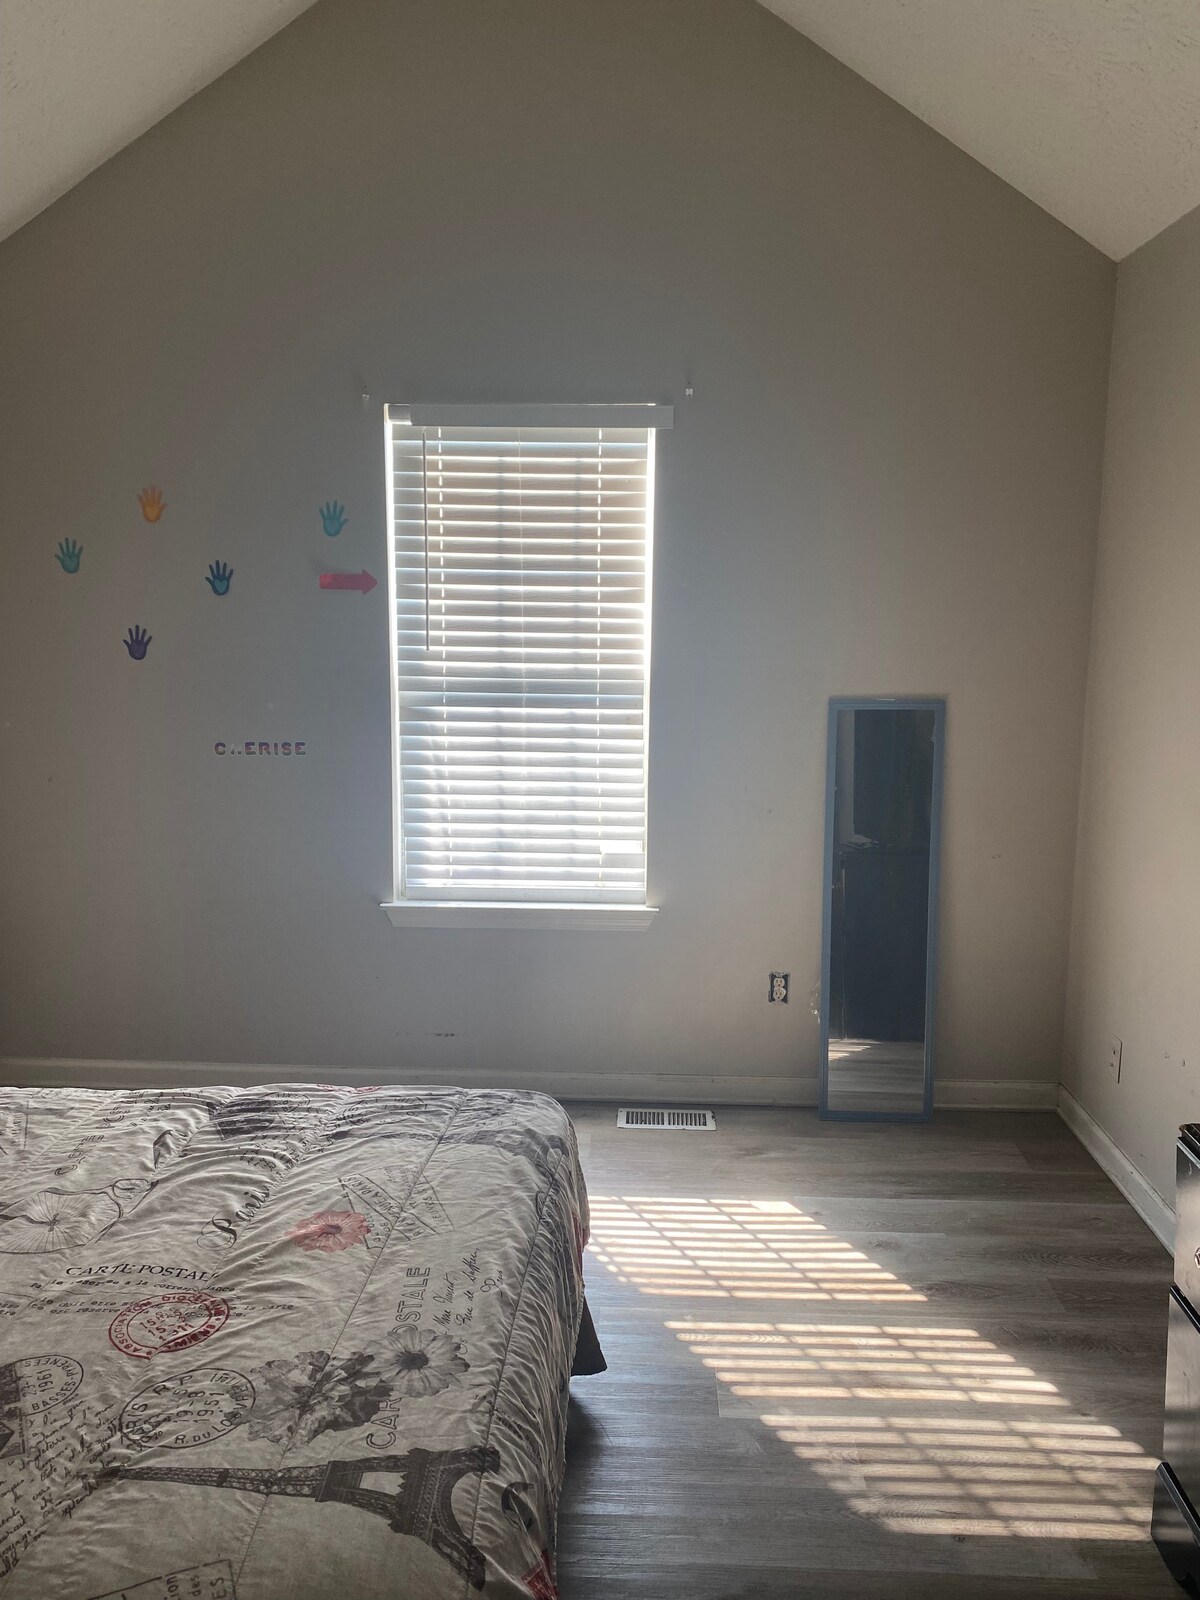 Comfortable room for rent in beautiful home